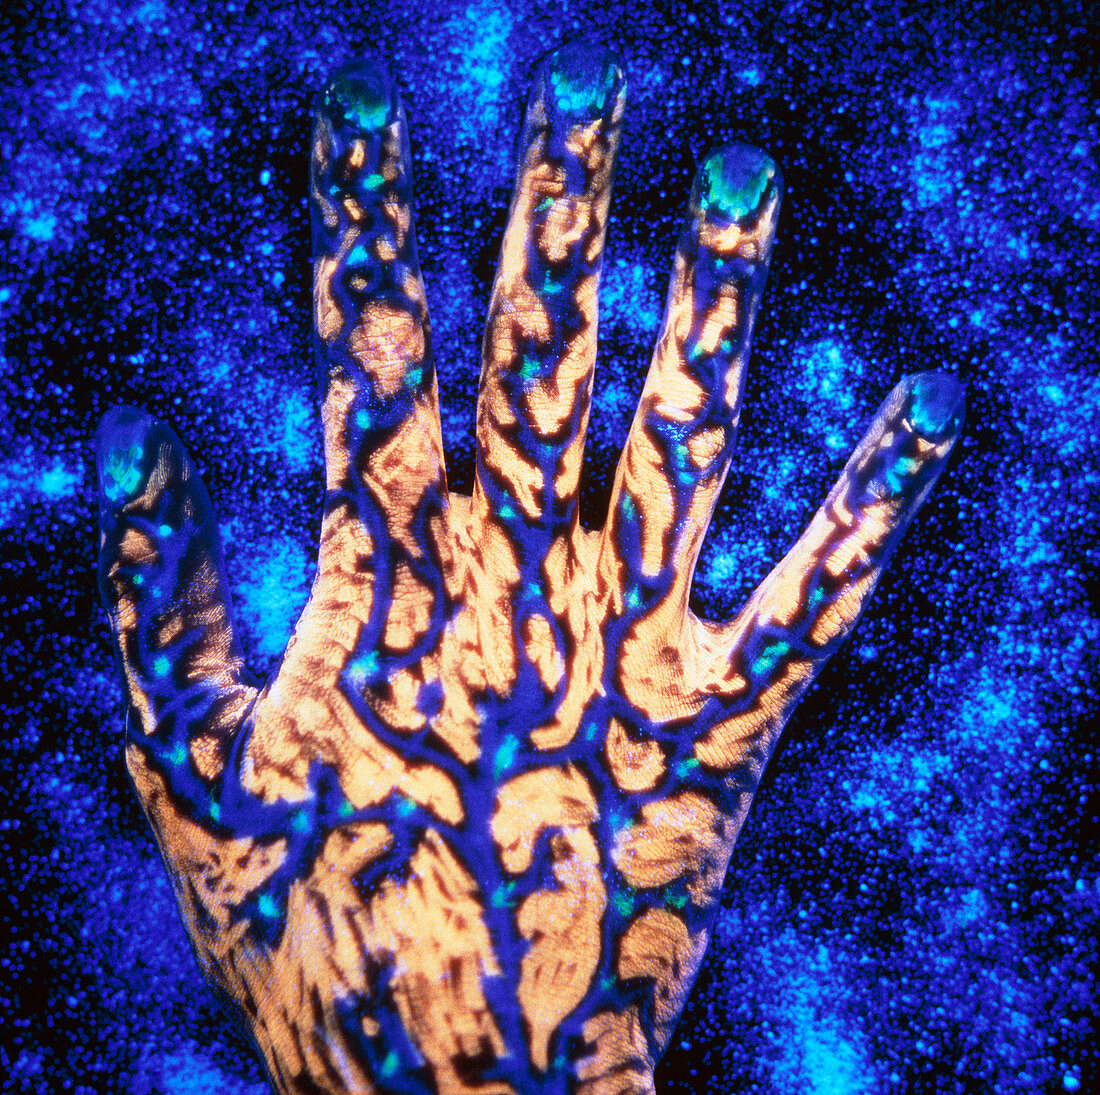 Fluorescent ink on hand,starry blue background